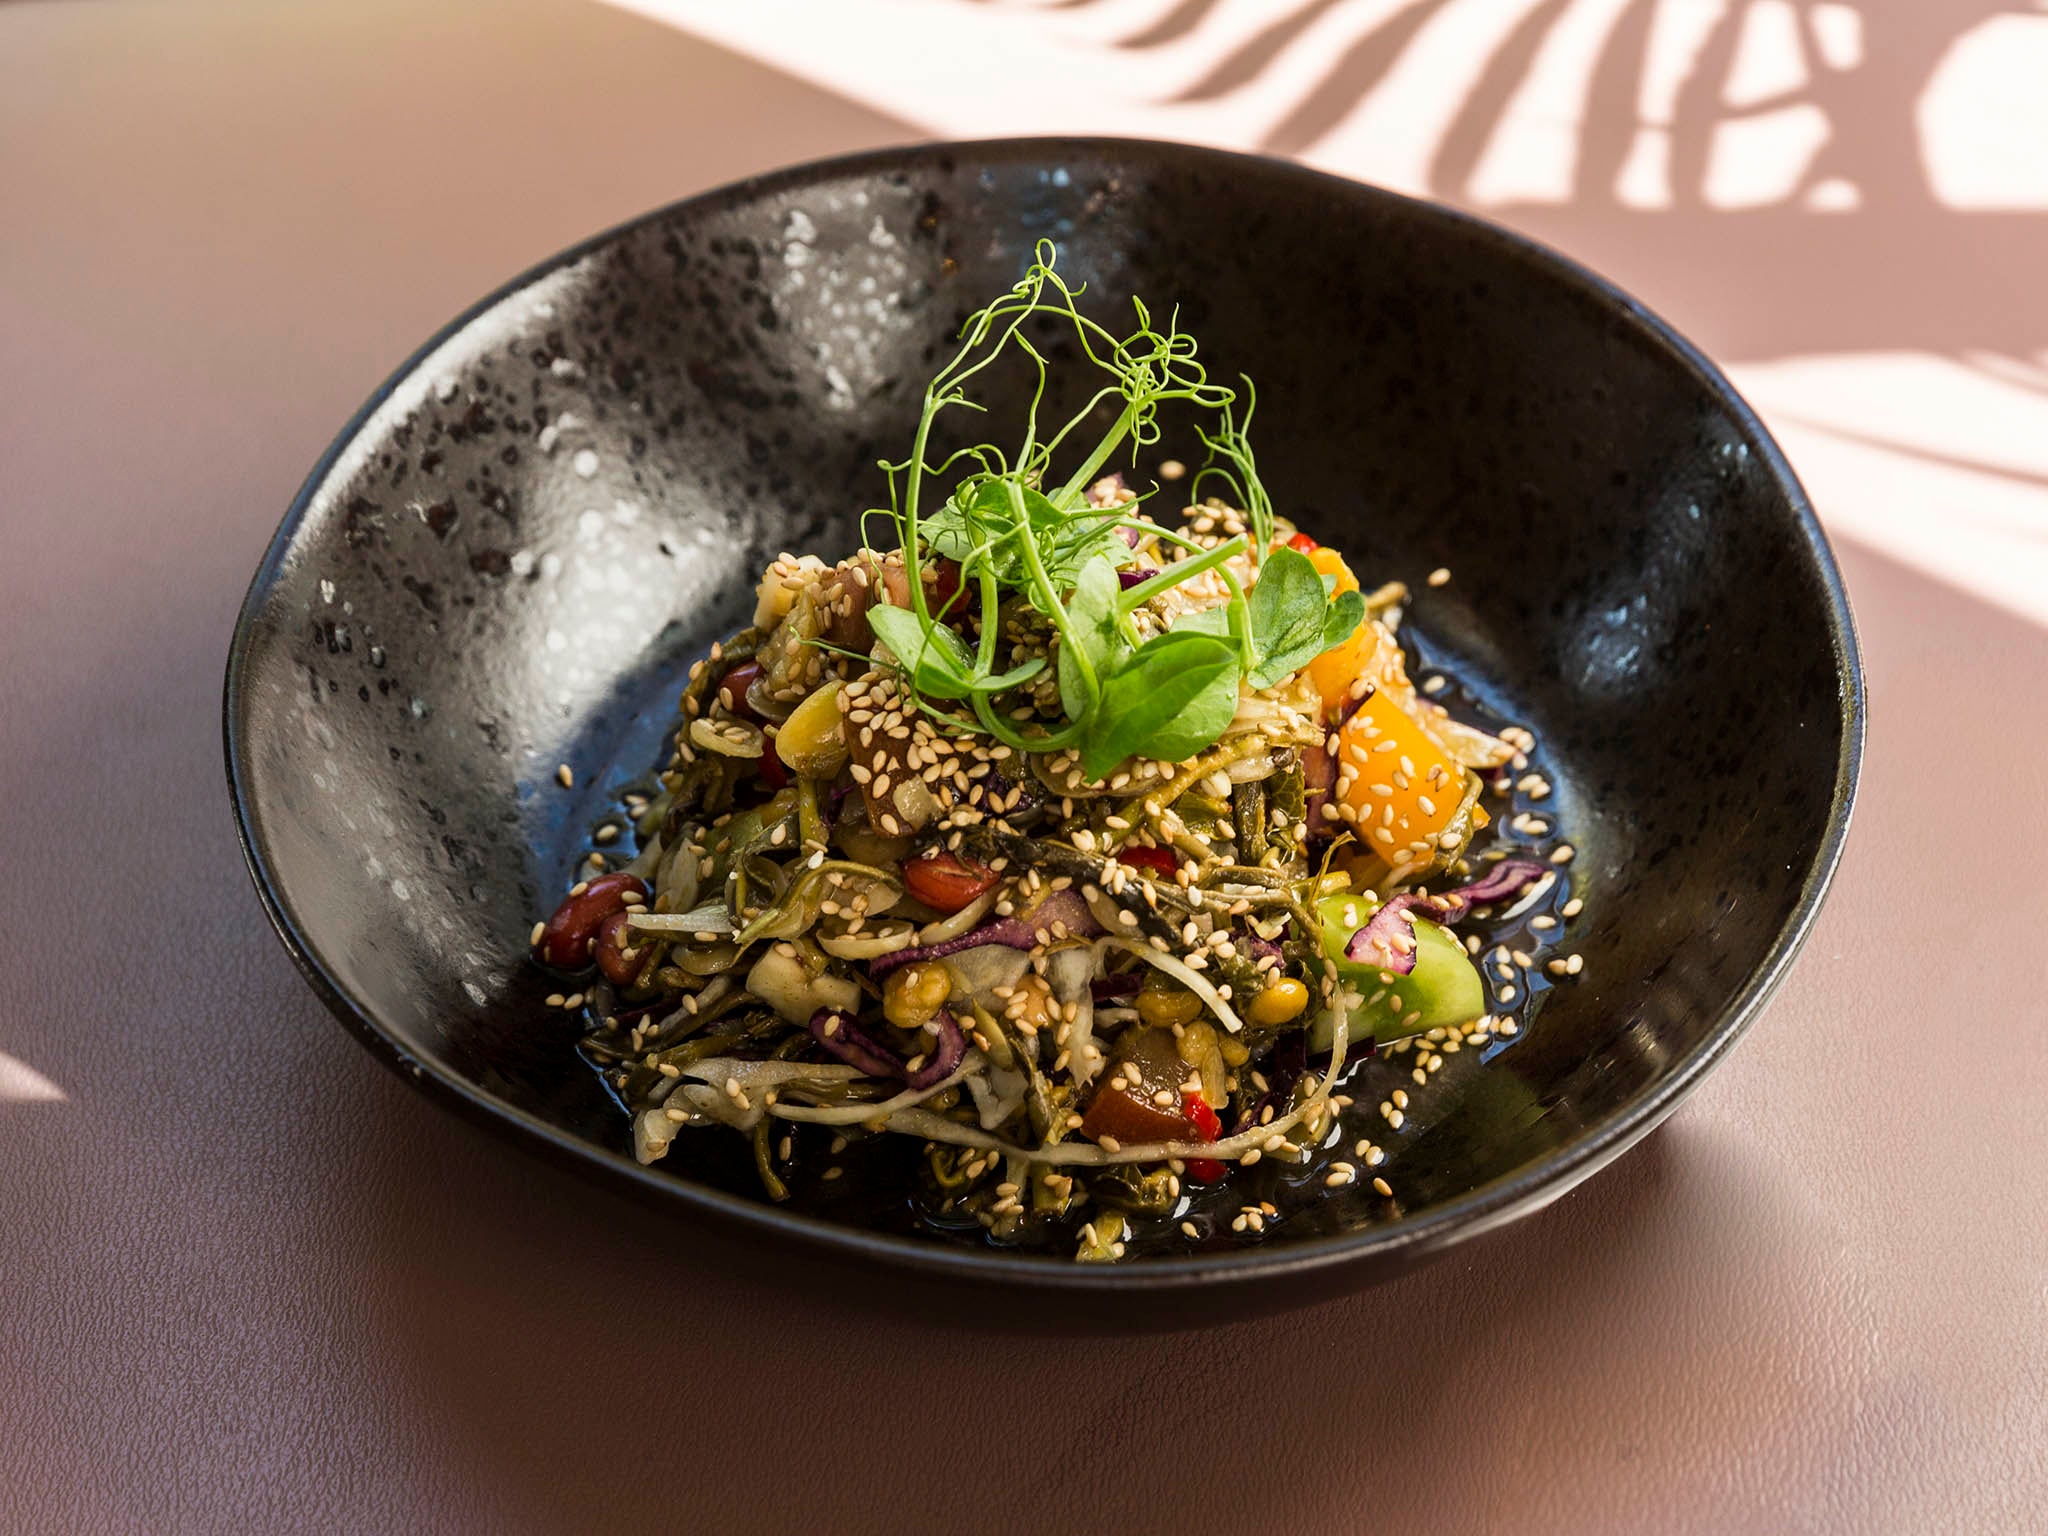 Lahpet, Burmese for tea leaf, offers modern interpretations of traditional dishes, most of them inspired by what the chefs used to eat in Myanmar as children